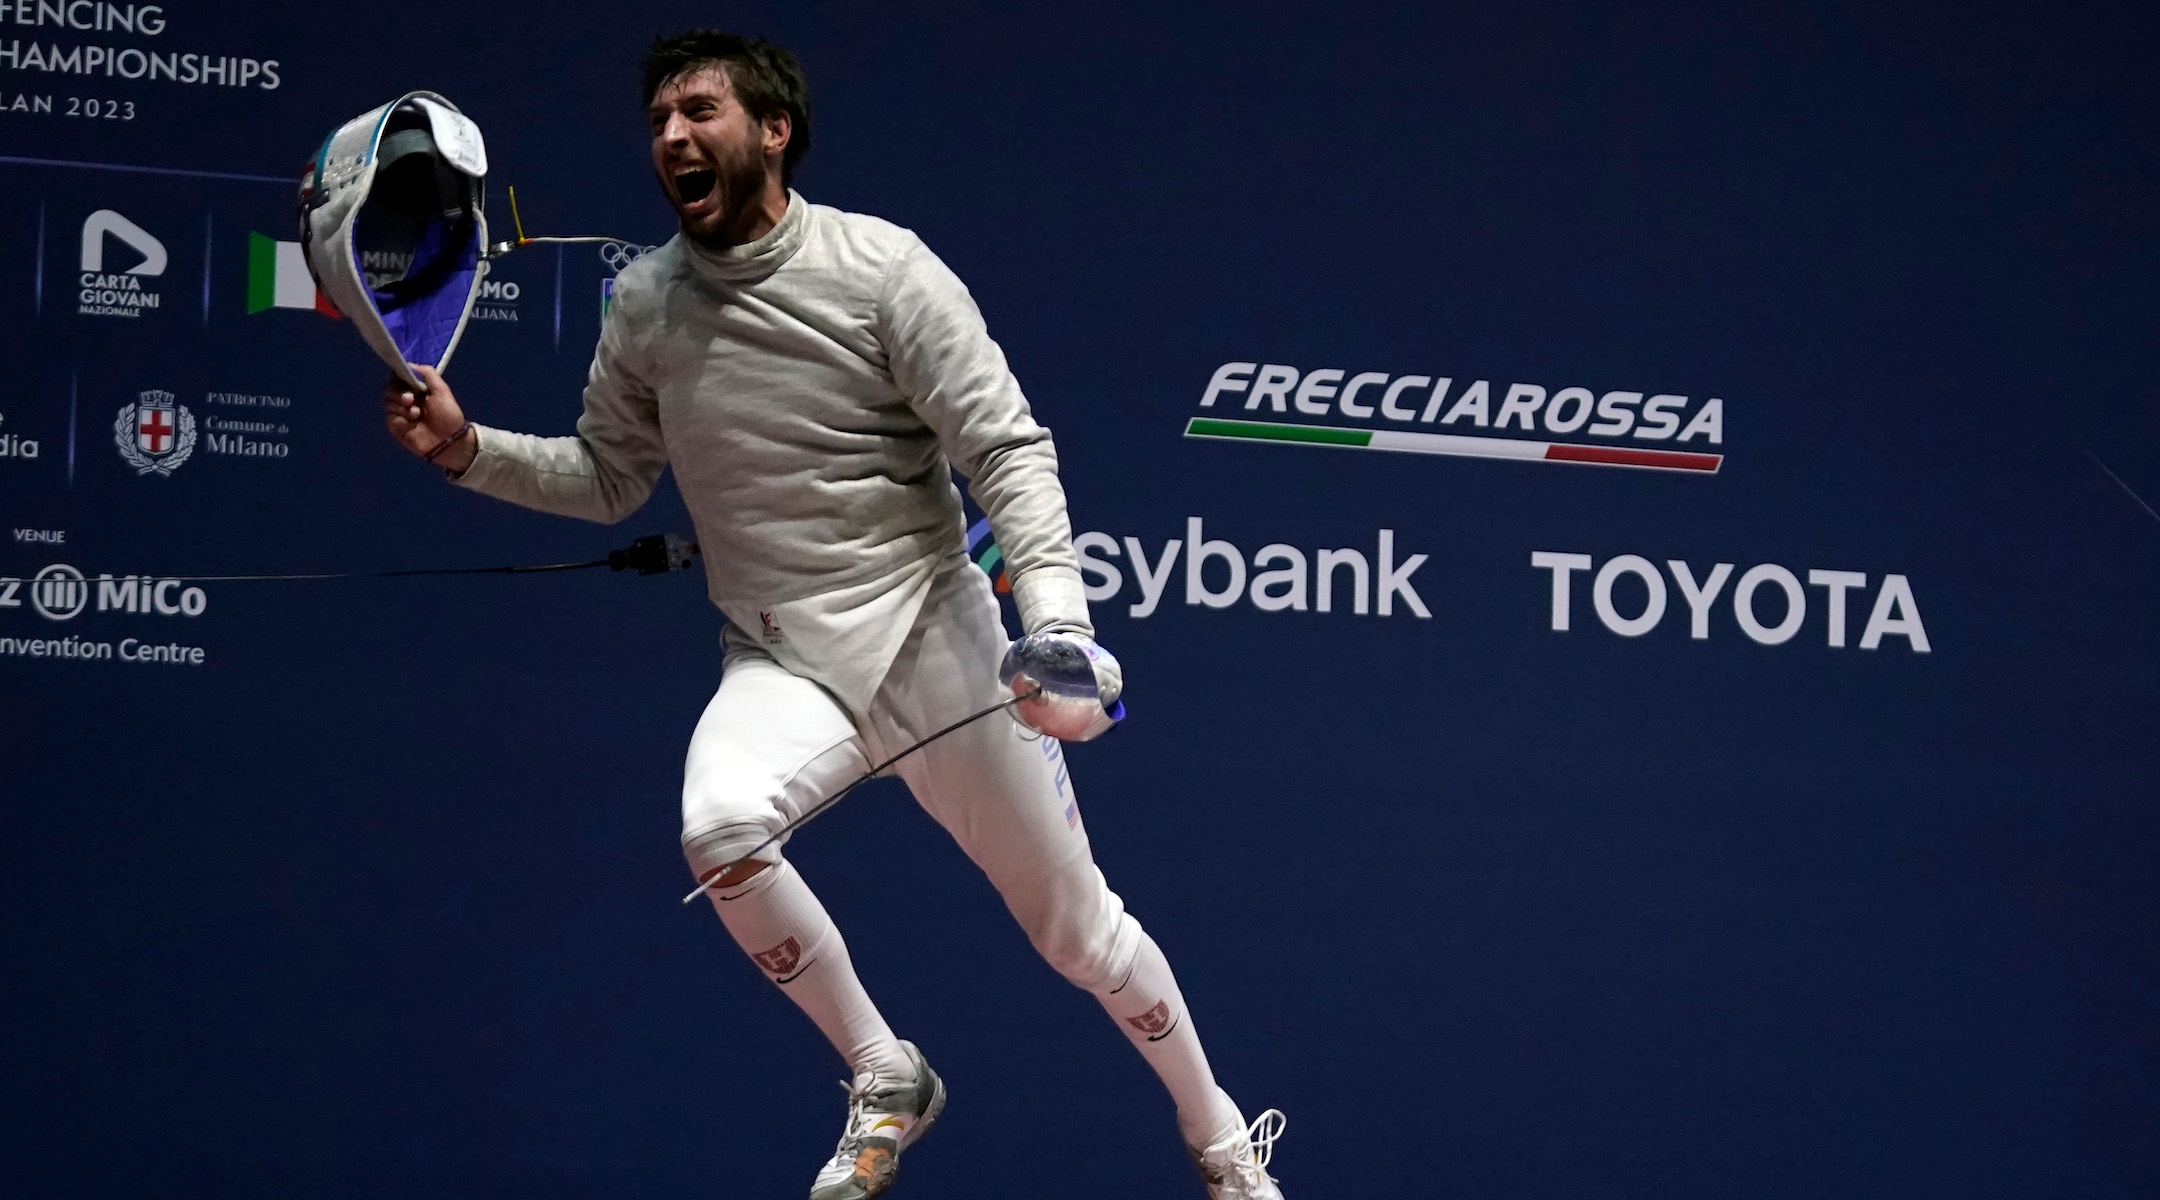 Eli Dershwitz celebrates after winning the sabre men’s senior individual semifinal during the Fencing World Championships in Milan, Italy, July 25, 2023. (Pier Marco Tacca/Getty Images)